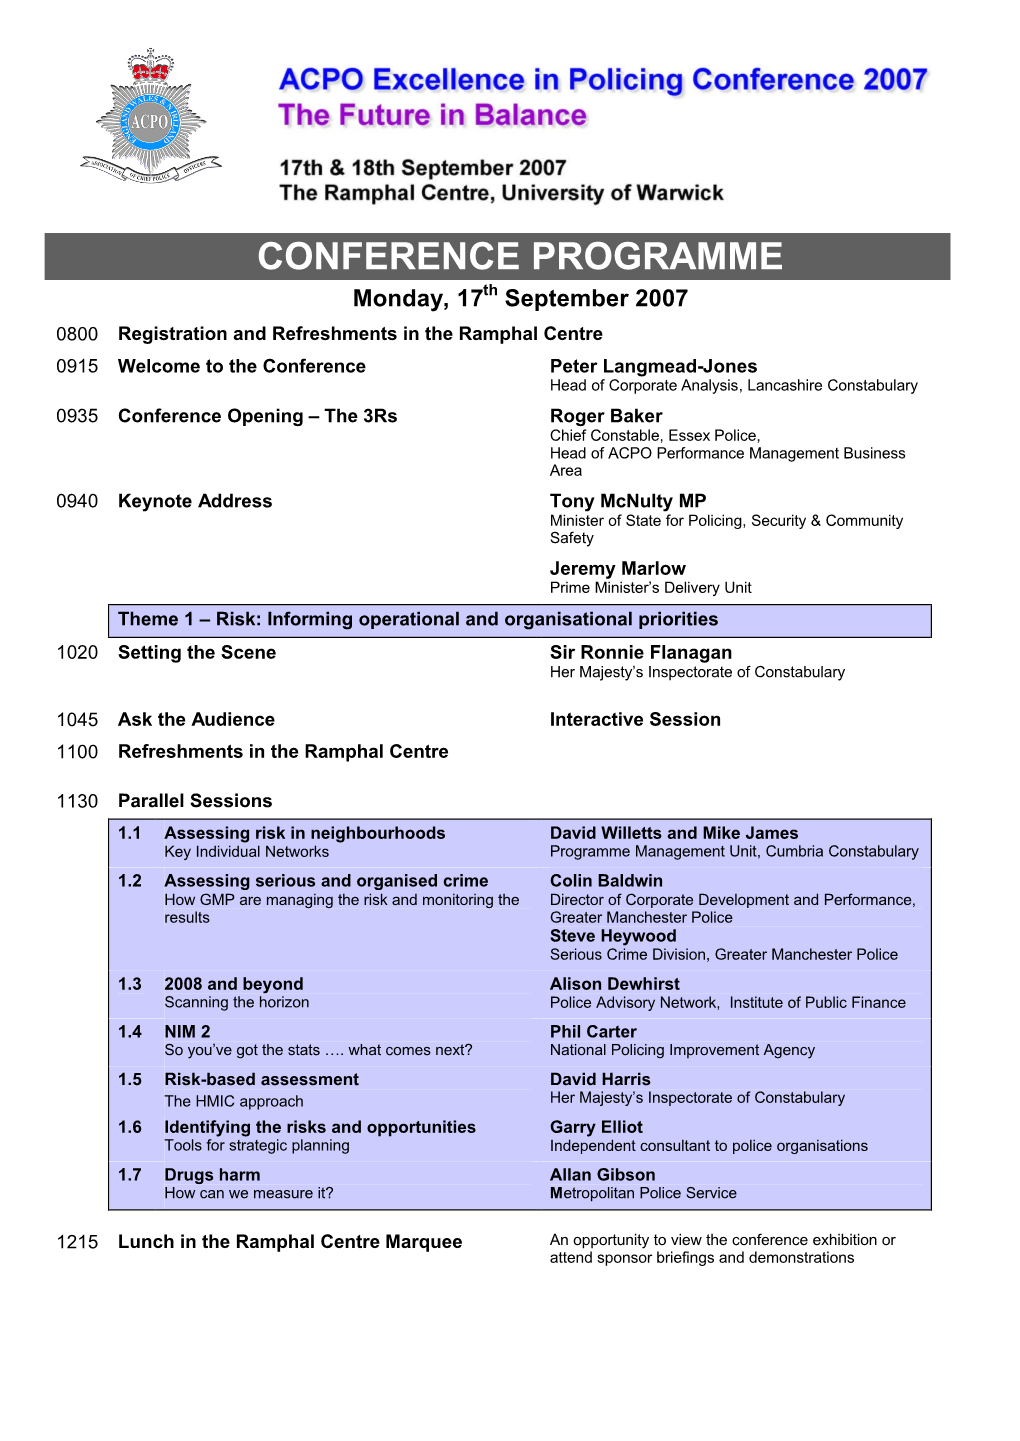 CONFERENCE PROGRAMME Monday, 17Th September 2007